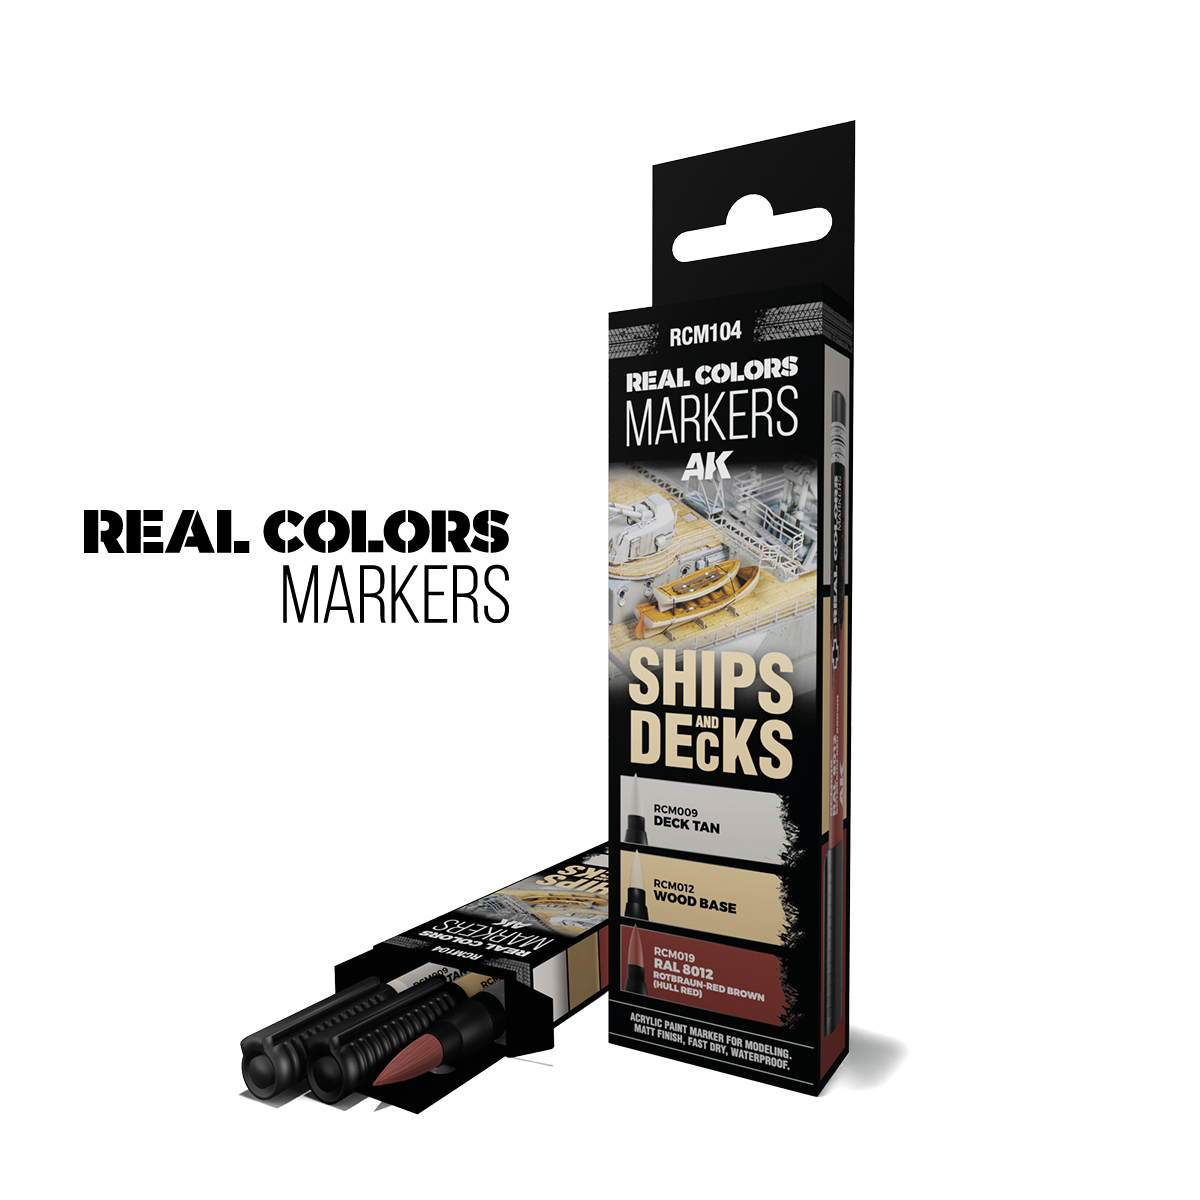 SHIPS AND DECKS – RC MARKERS SET